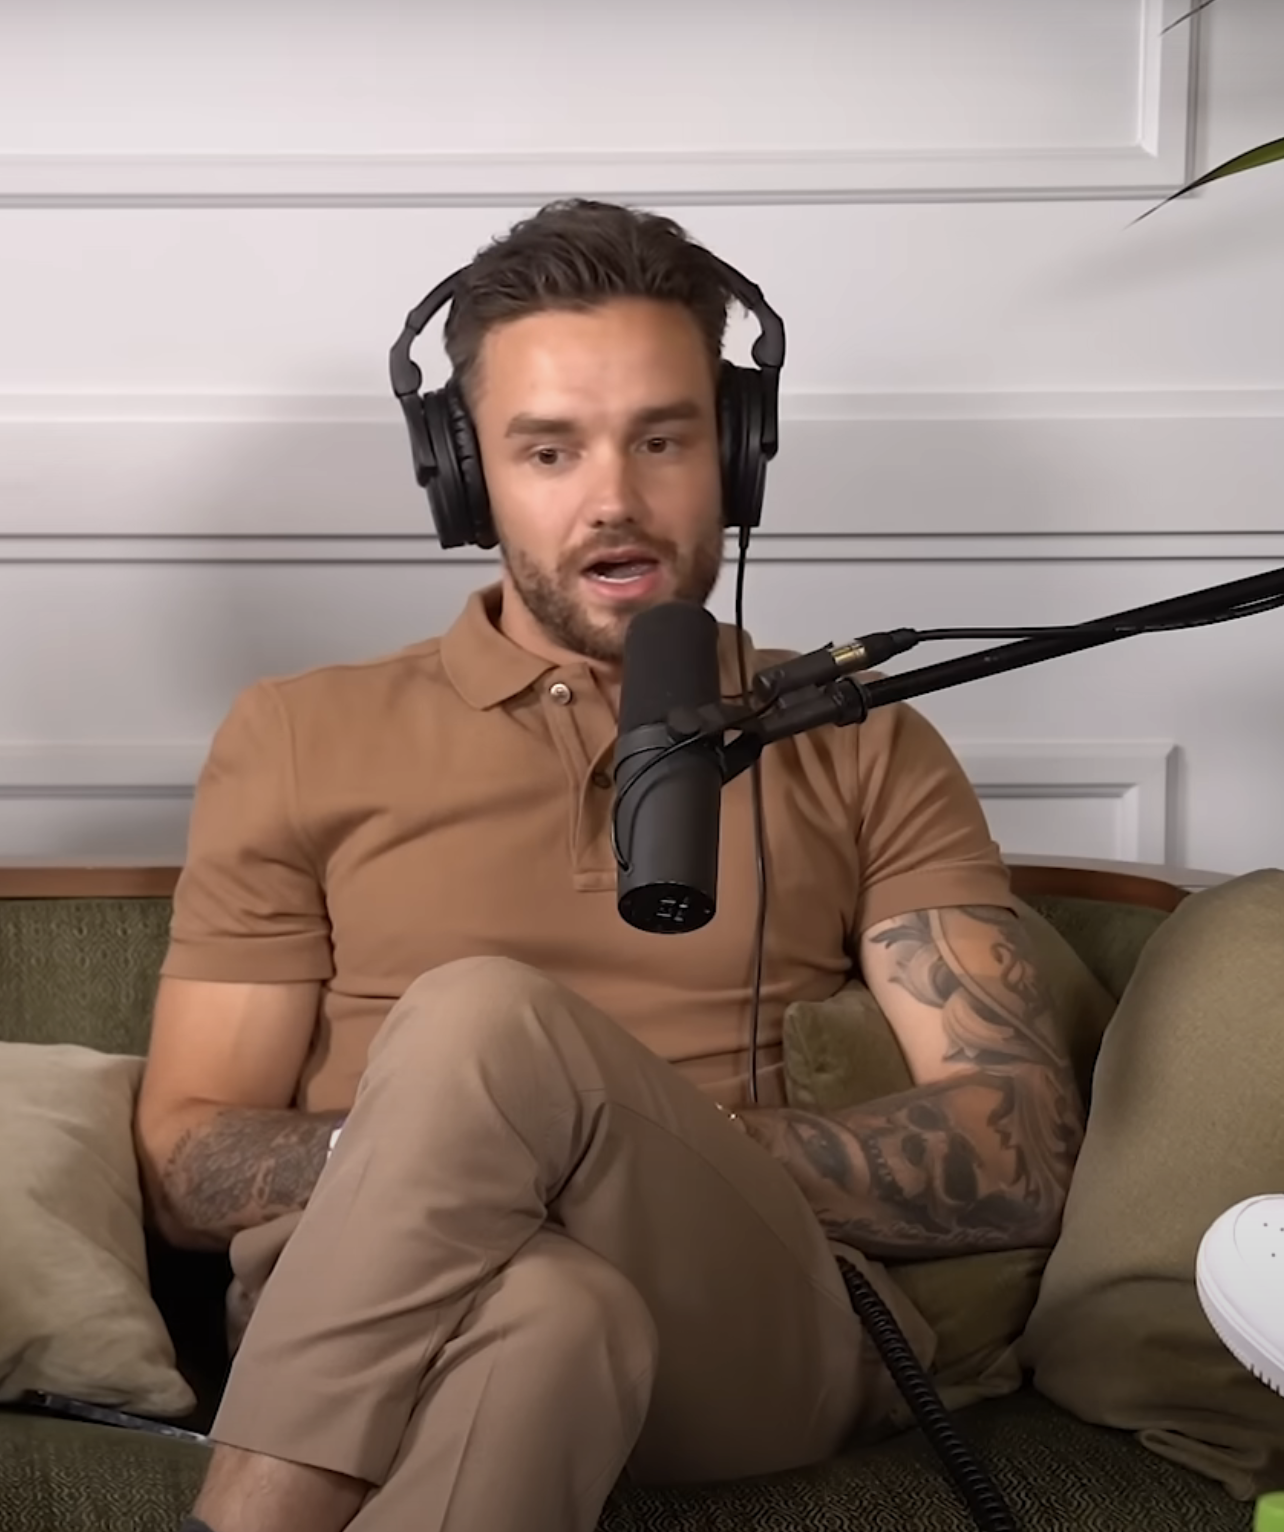 Liam Payne wearing a polo shirt, seated with microphone and headphones, recording a podcast